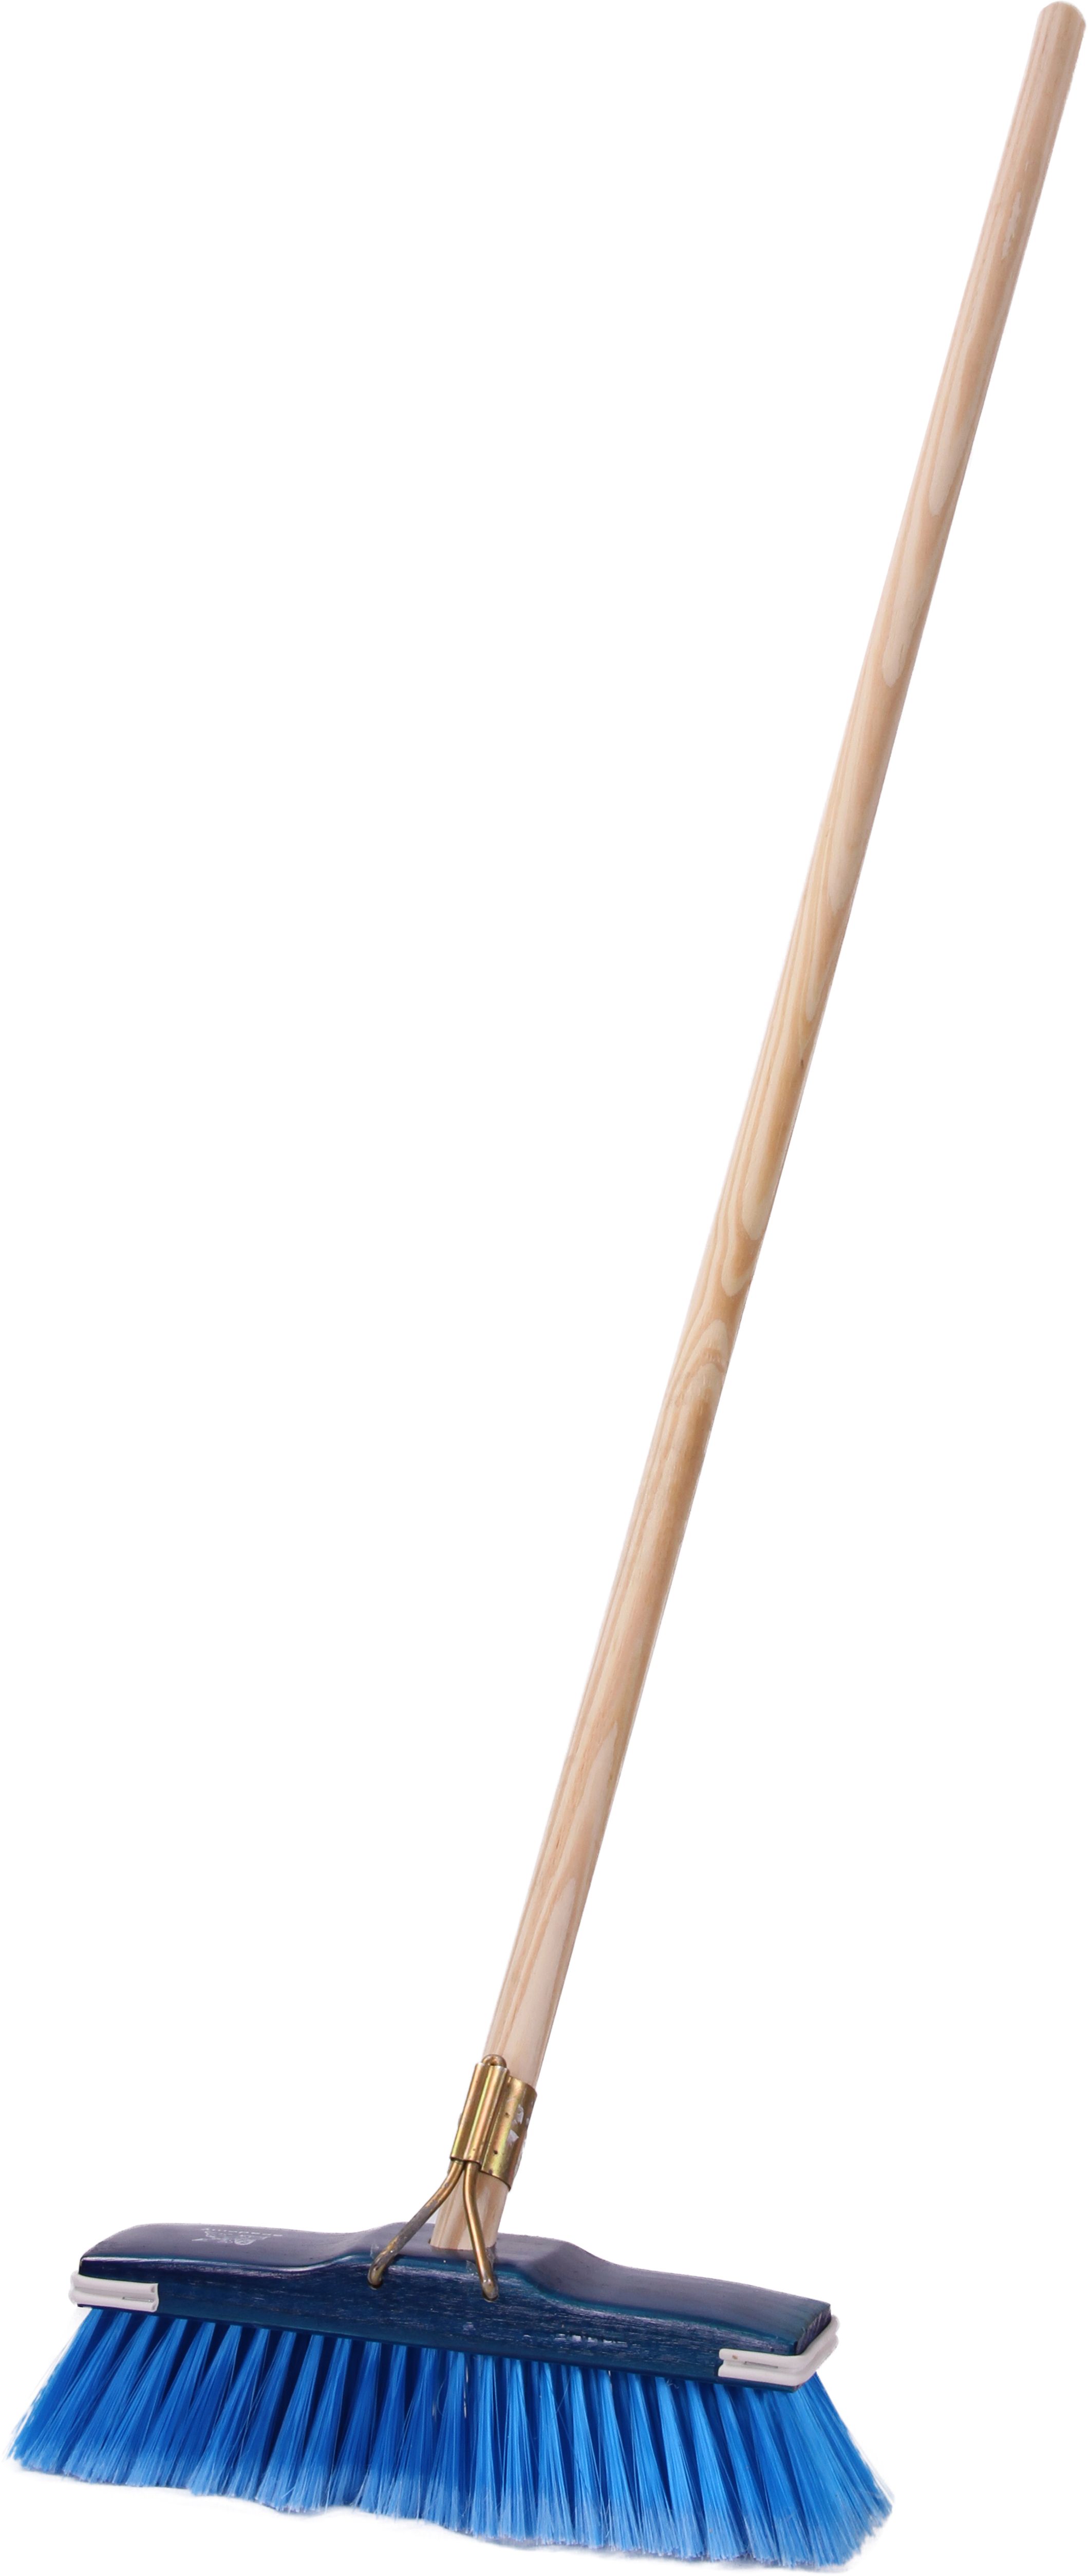 GB1 Soft broom filled with flagged synthetic fibre in assorted colours with buffer, with wooden handle.